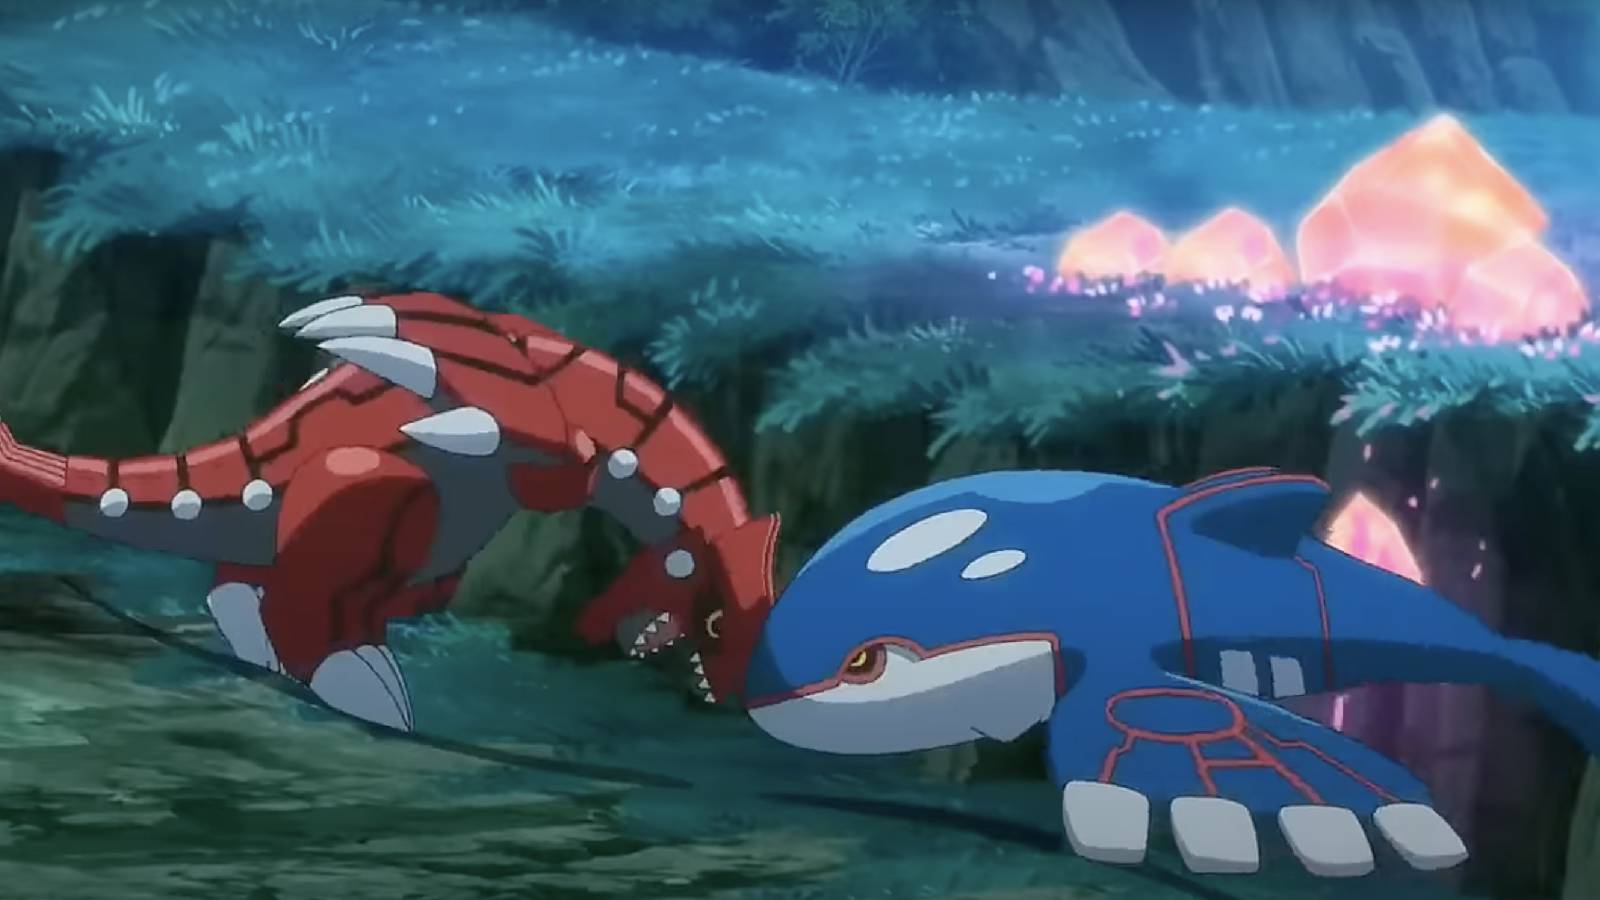 A still from the Pokemon anime shows Groudon and Kyogre locked in combat